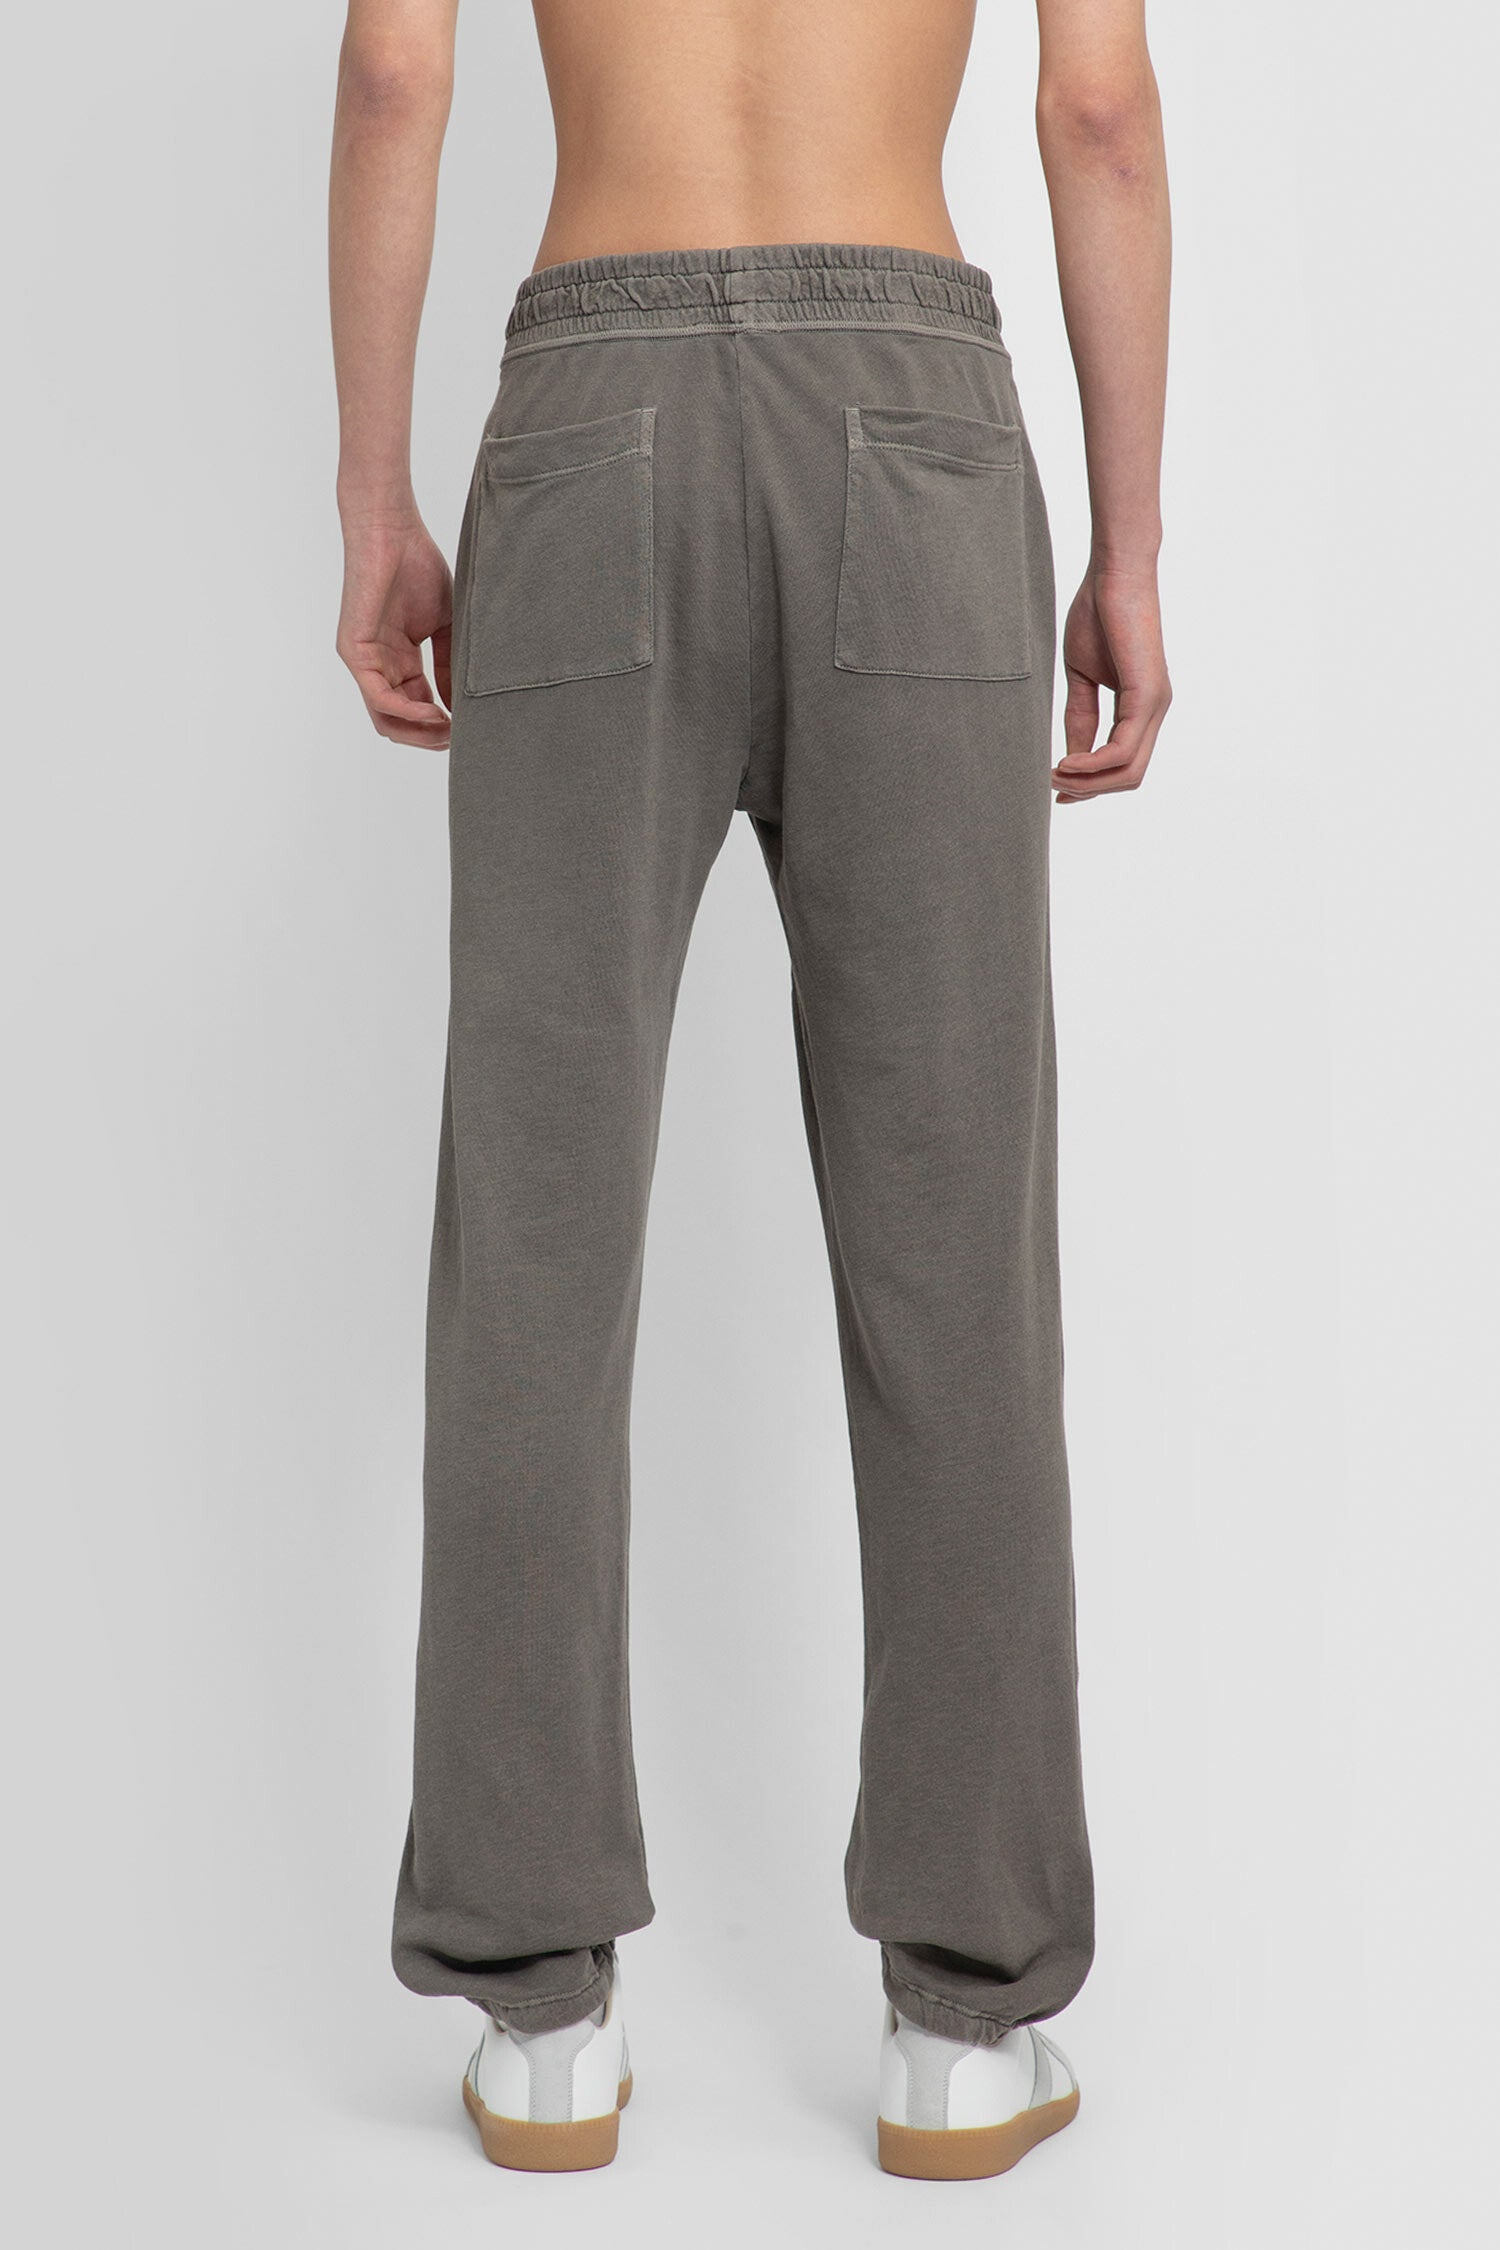 JAMES PERSE MAN GREY TROUSERS